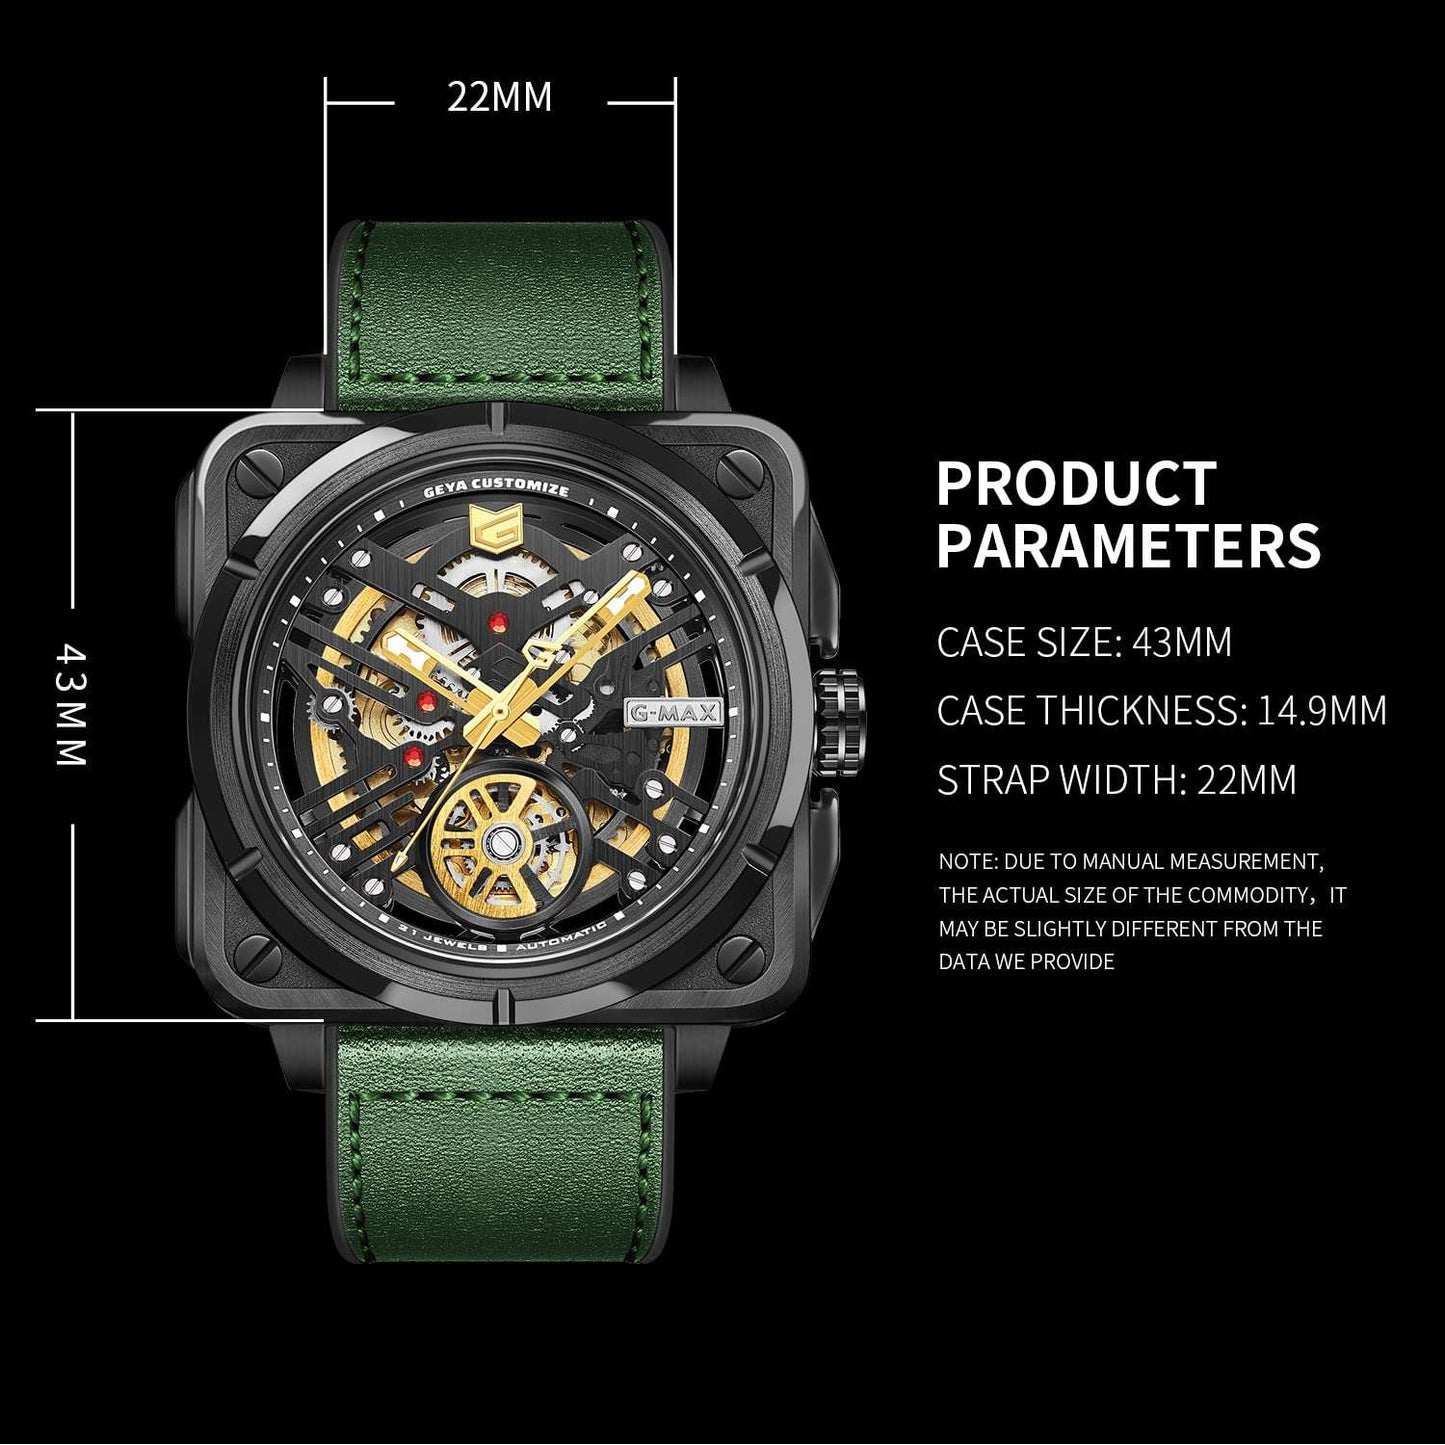 Automatic Mechanical Watch Skeleton Stainless 50M Waterproof Anti Shock Casual Diver Men Wrist Watch Sterling Watches Chronograph Analog Business Casual Fashion Adjustable Leather Band Phil and Gazelle